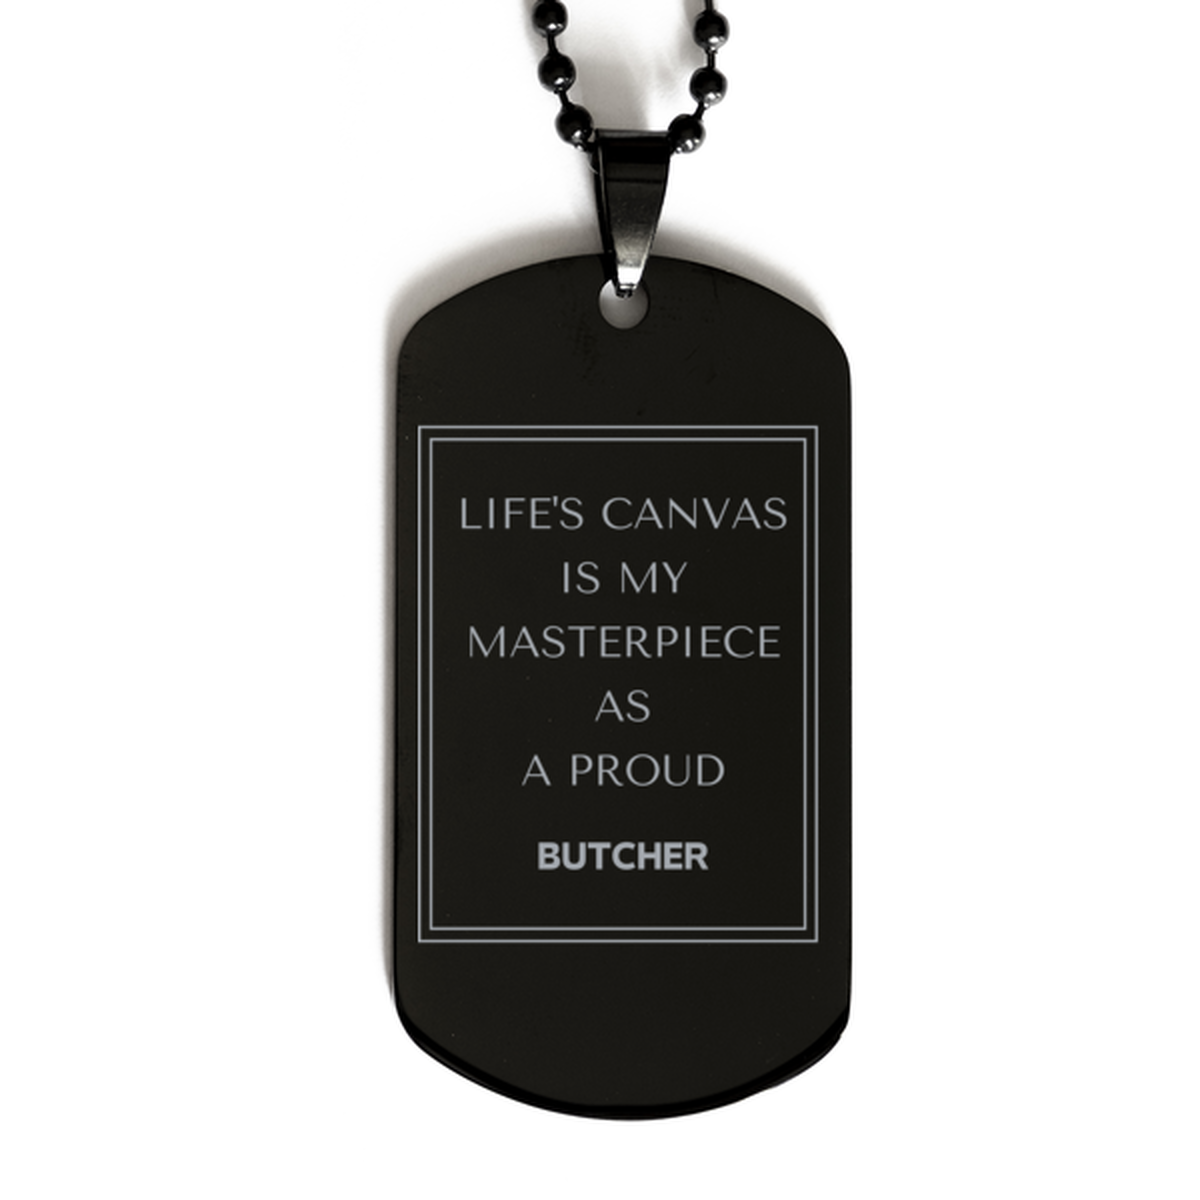 Proud Butcher Gifts, Life's canvas is my masterpiece, Epic Birthday Christmas Unique Black Dog Tag For Butcher, Coworkers, Men, Women, Friends